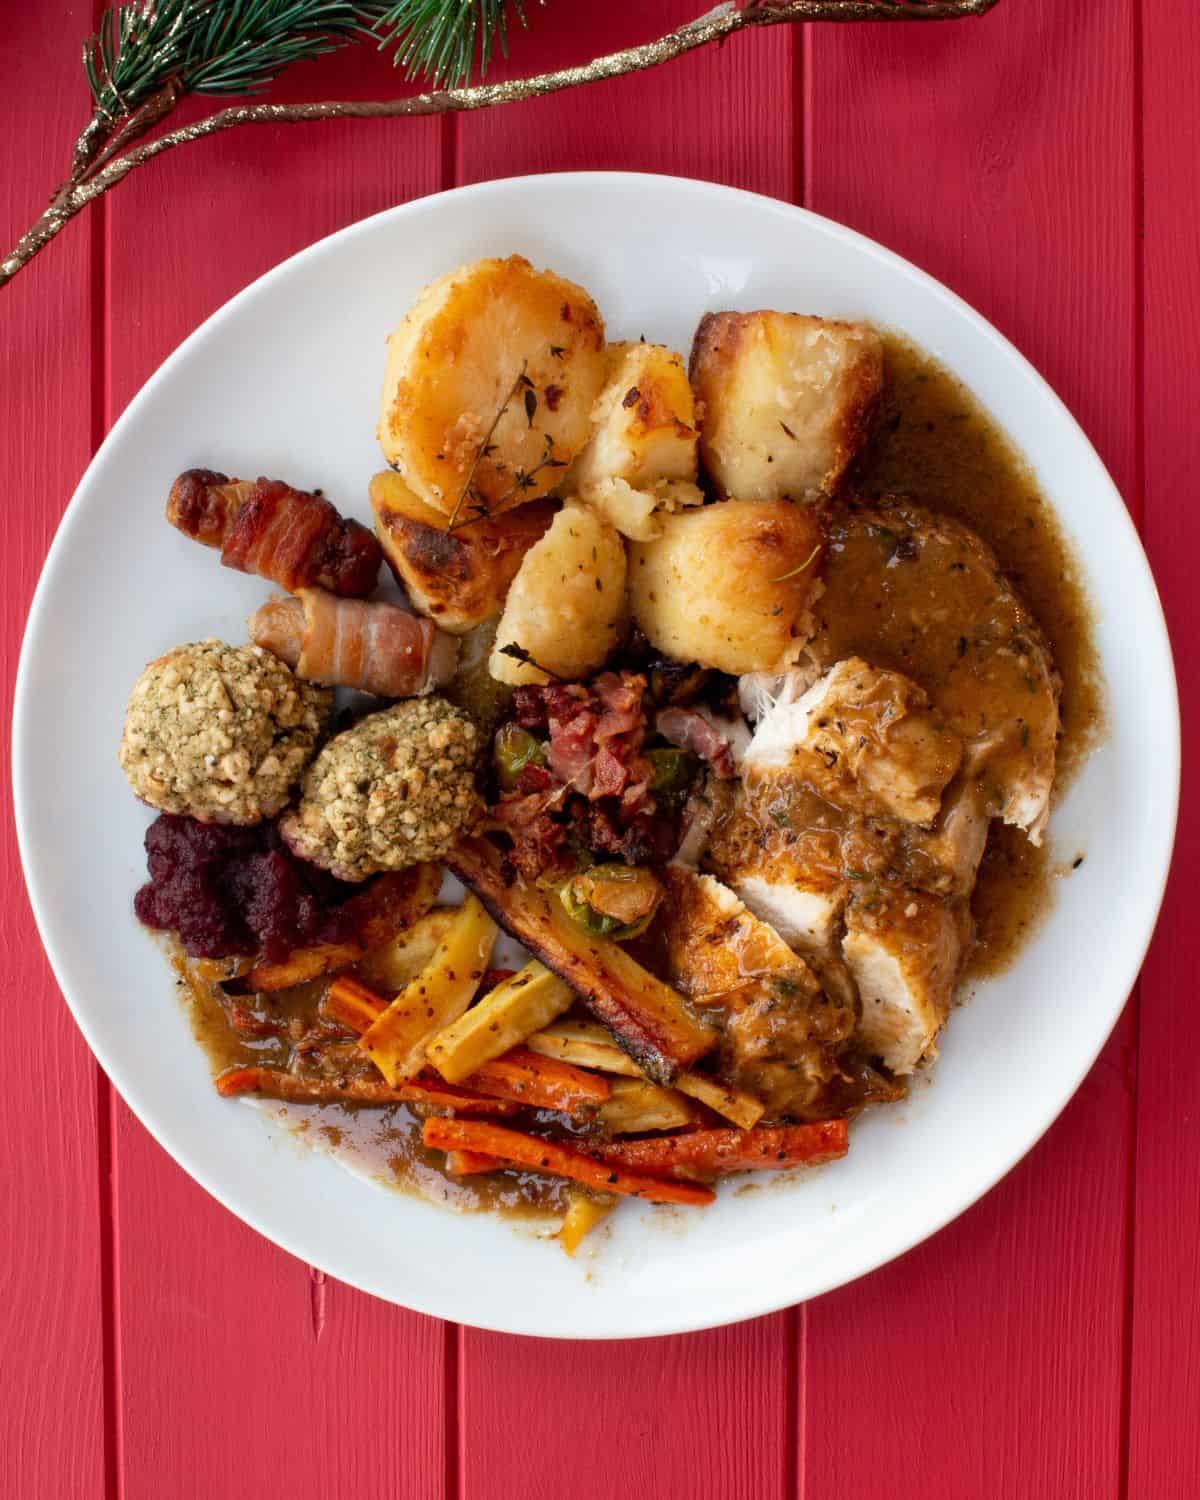 Christmas dinners with roasted potatoes, stuffing, pigs in blankets, roasted carrots and parsnips, chicken, brussel sprouts and cranberry sauce topped with gravy.